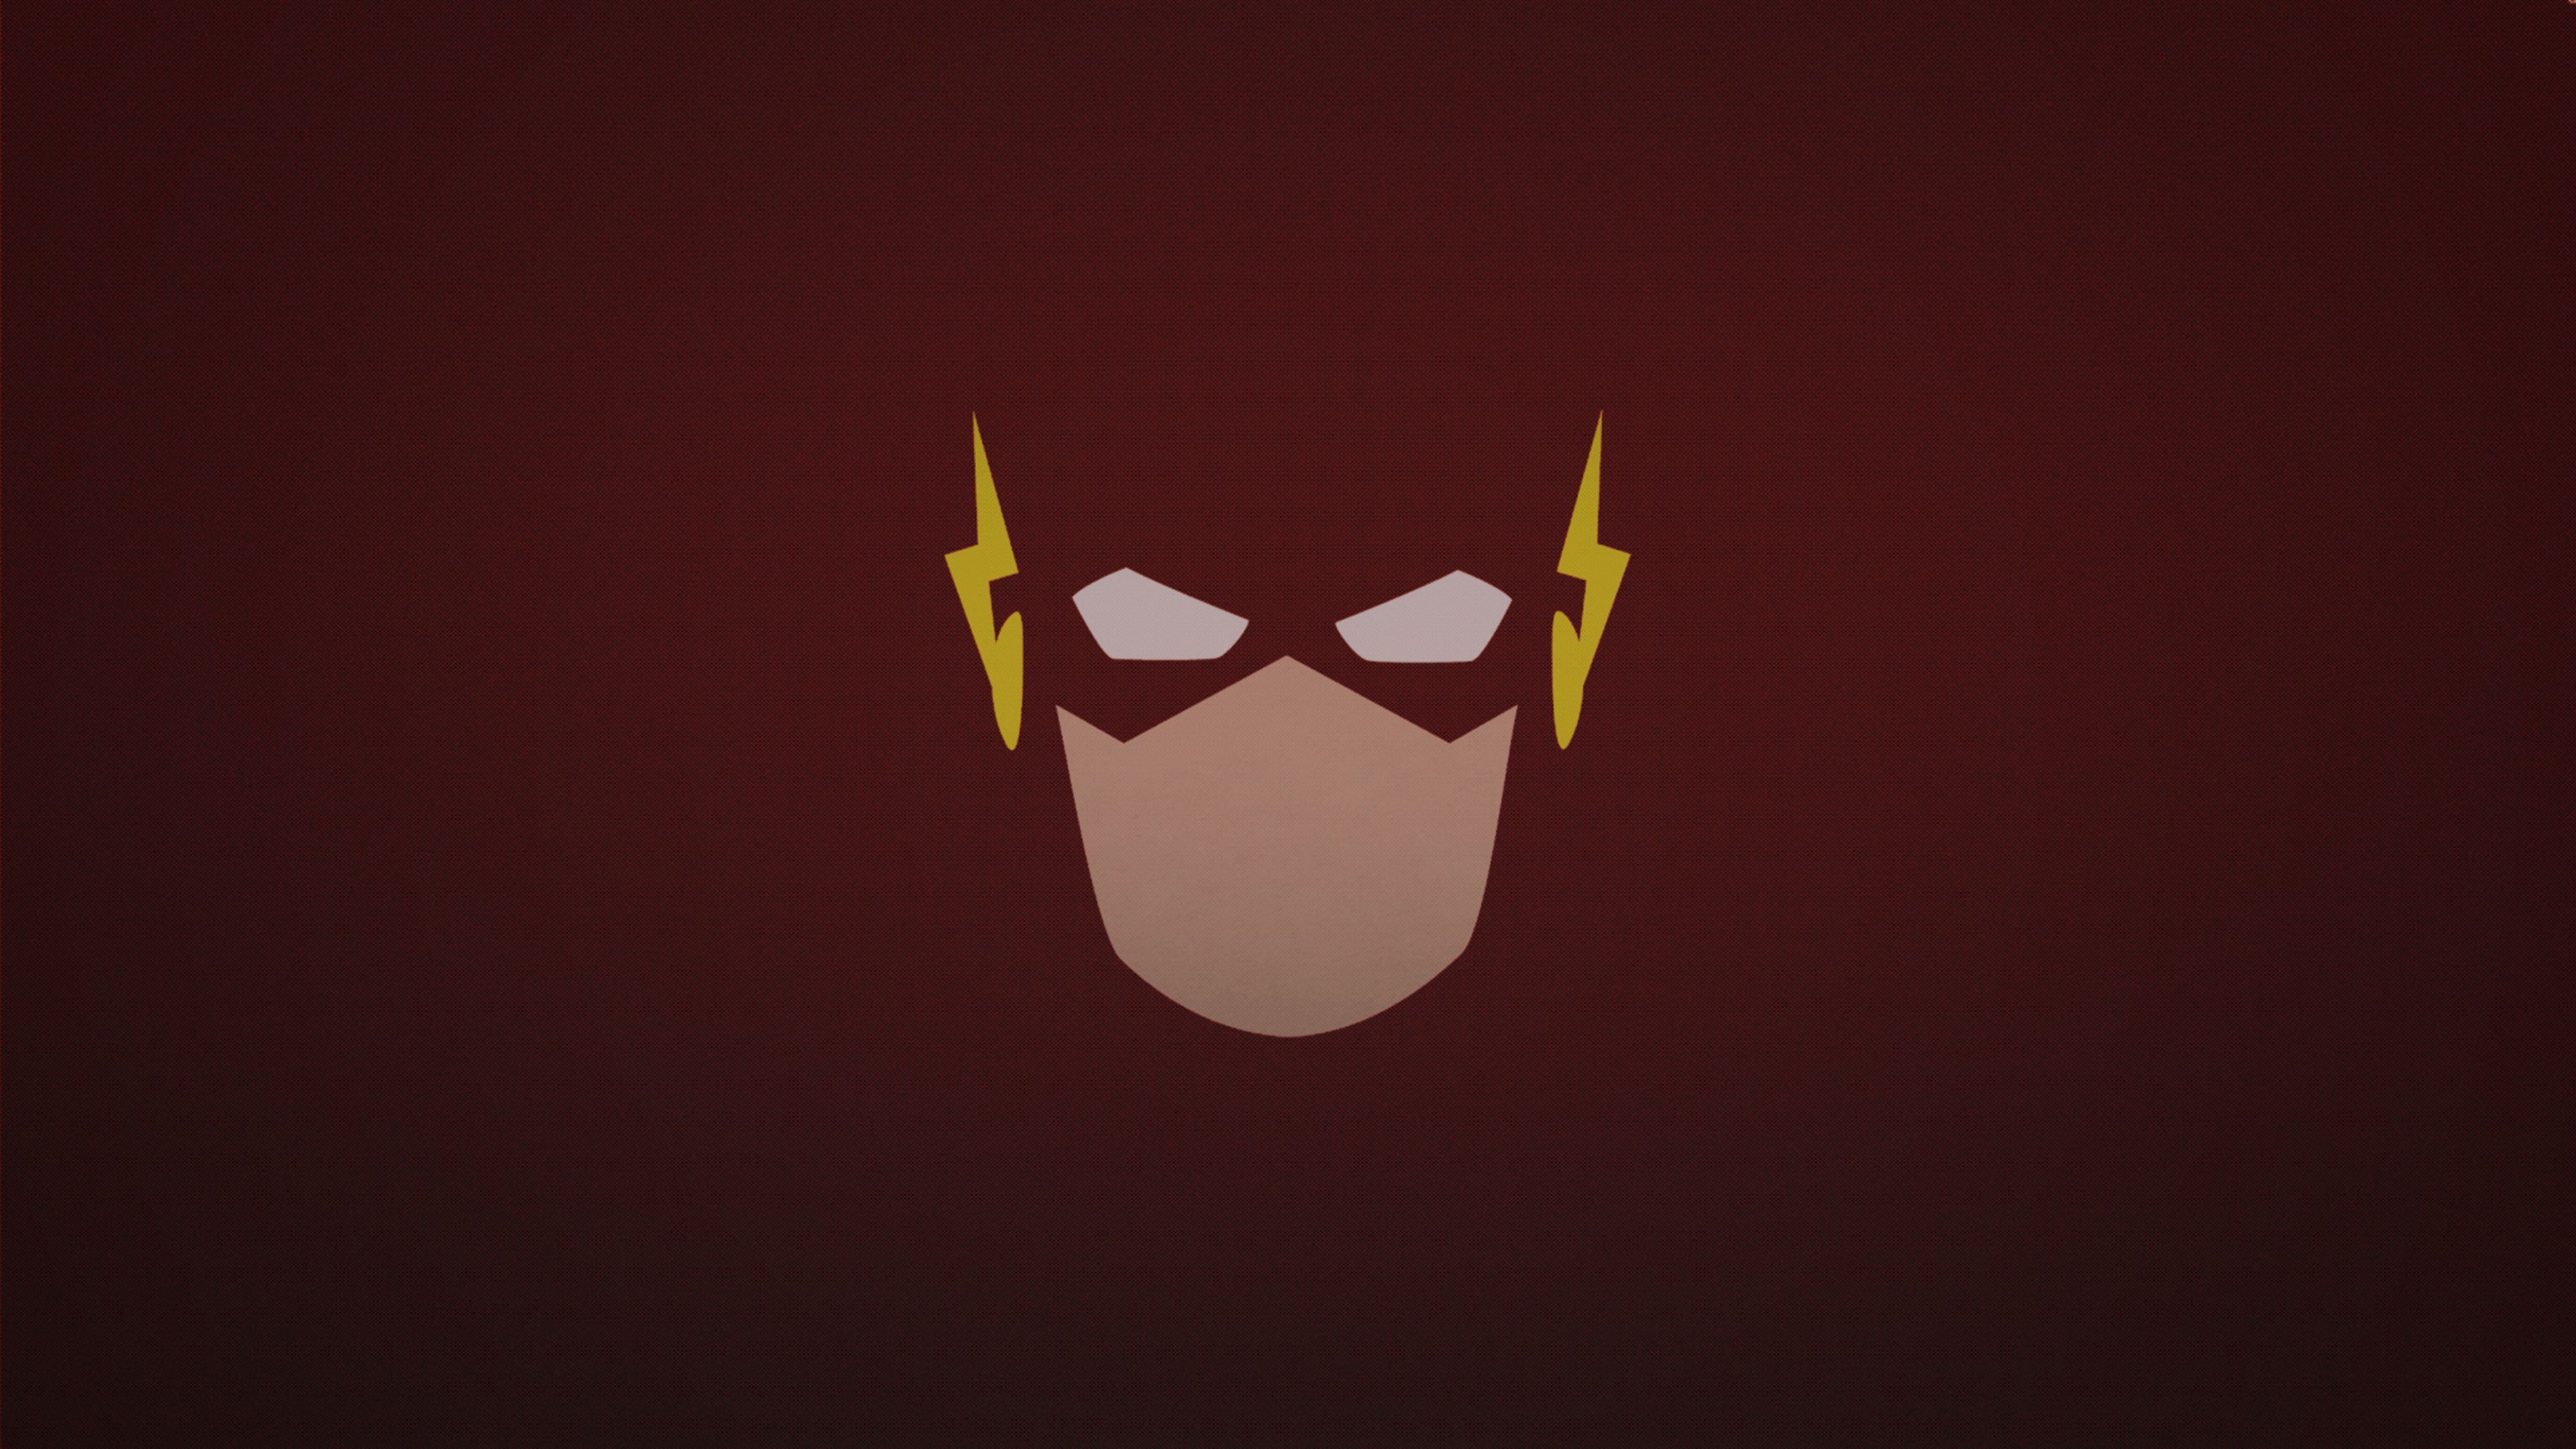 The Flash Minimalism Wallpapers